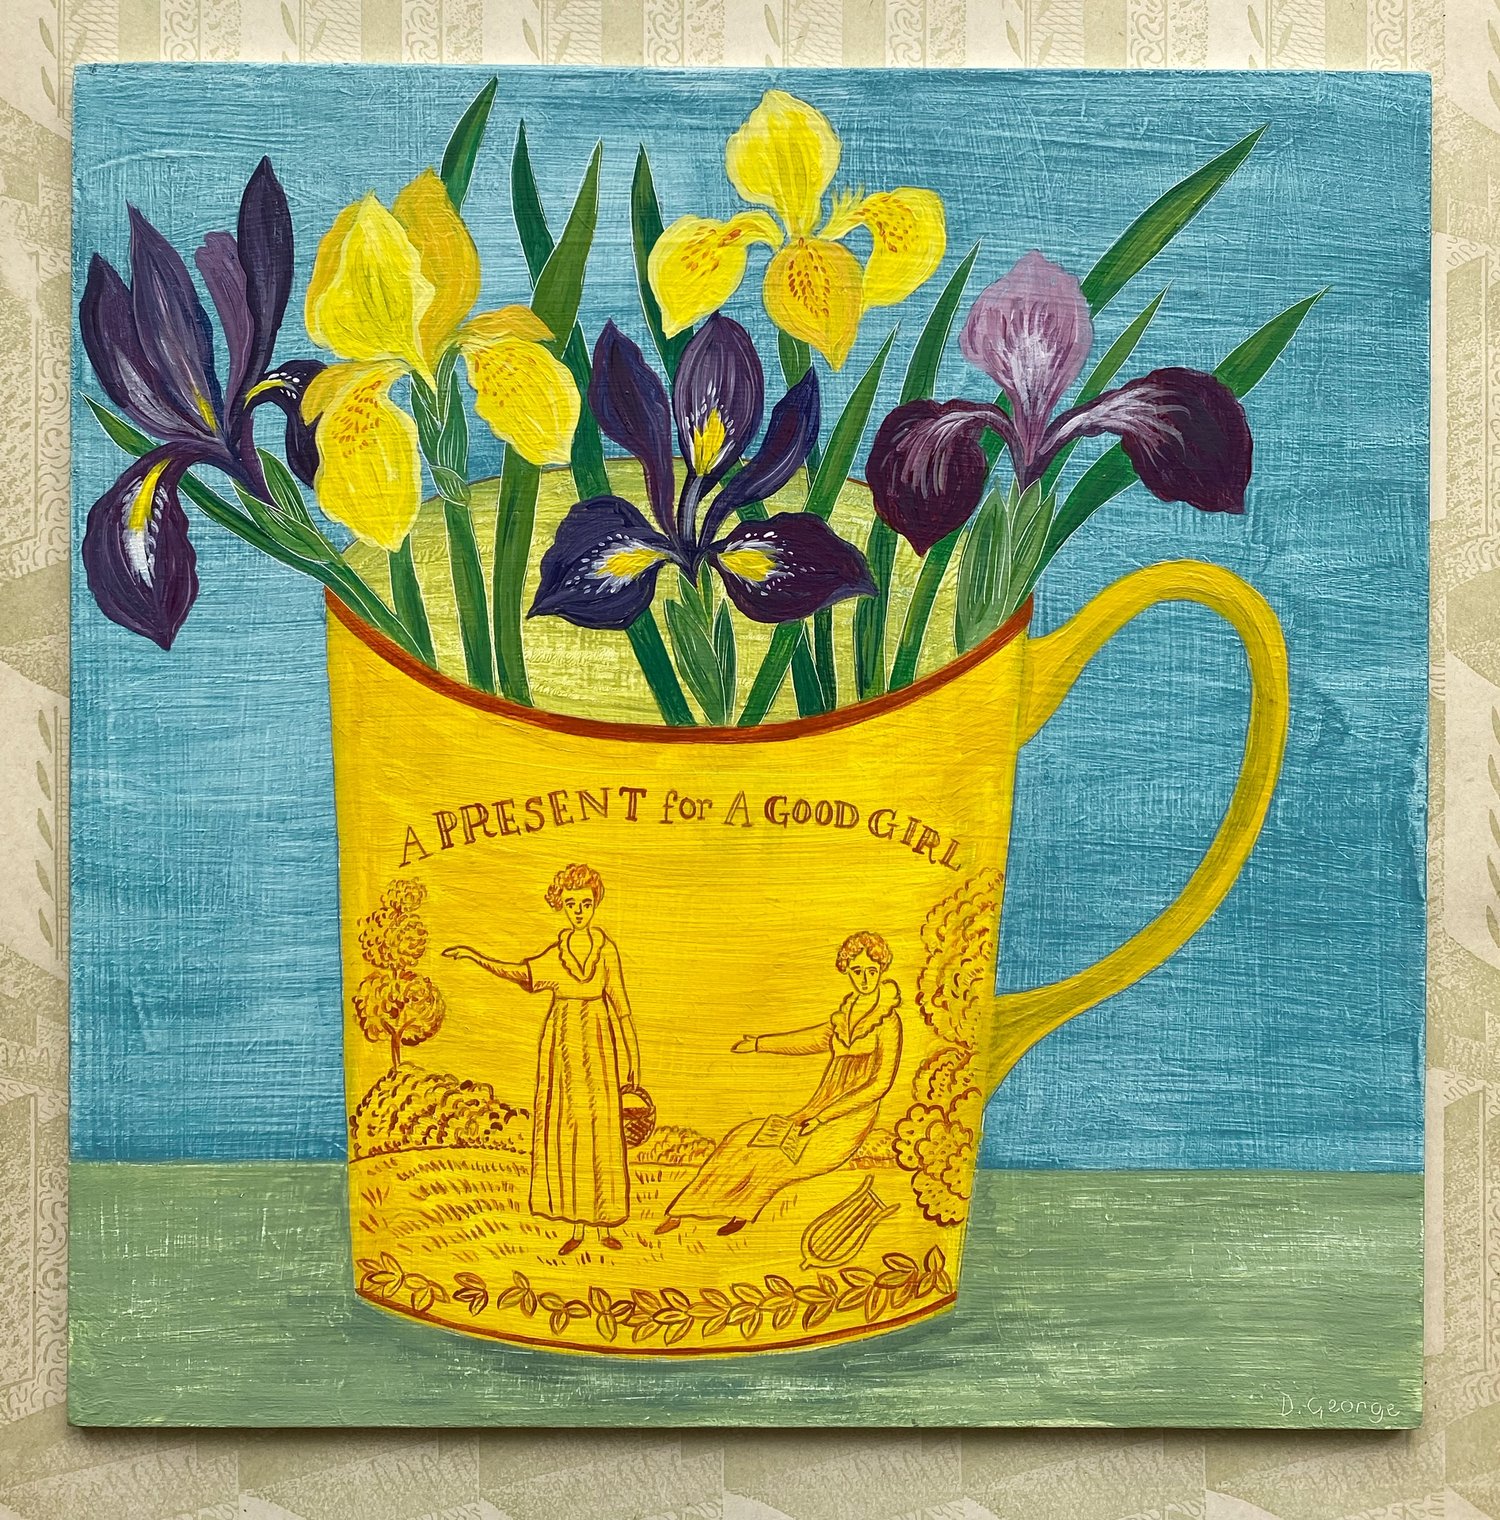 Image of Good girl cup and Irises